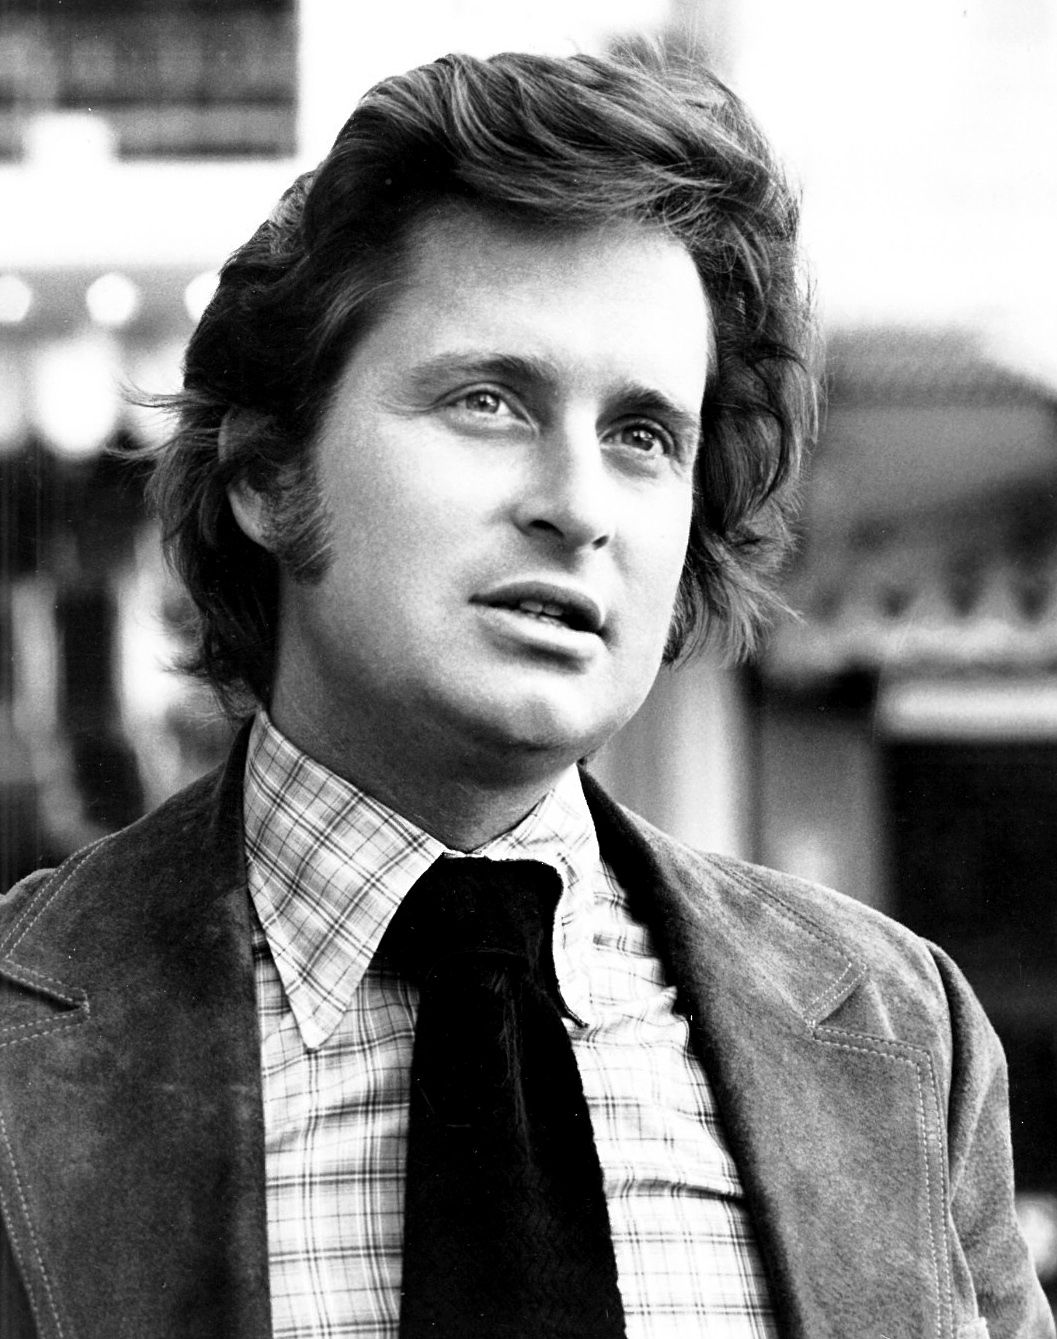 A young Michael Douglas with what can only be described as pristine hair.